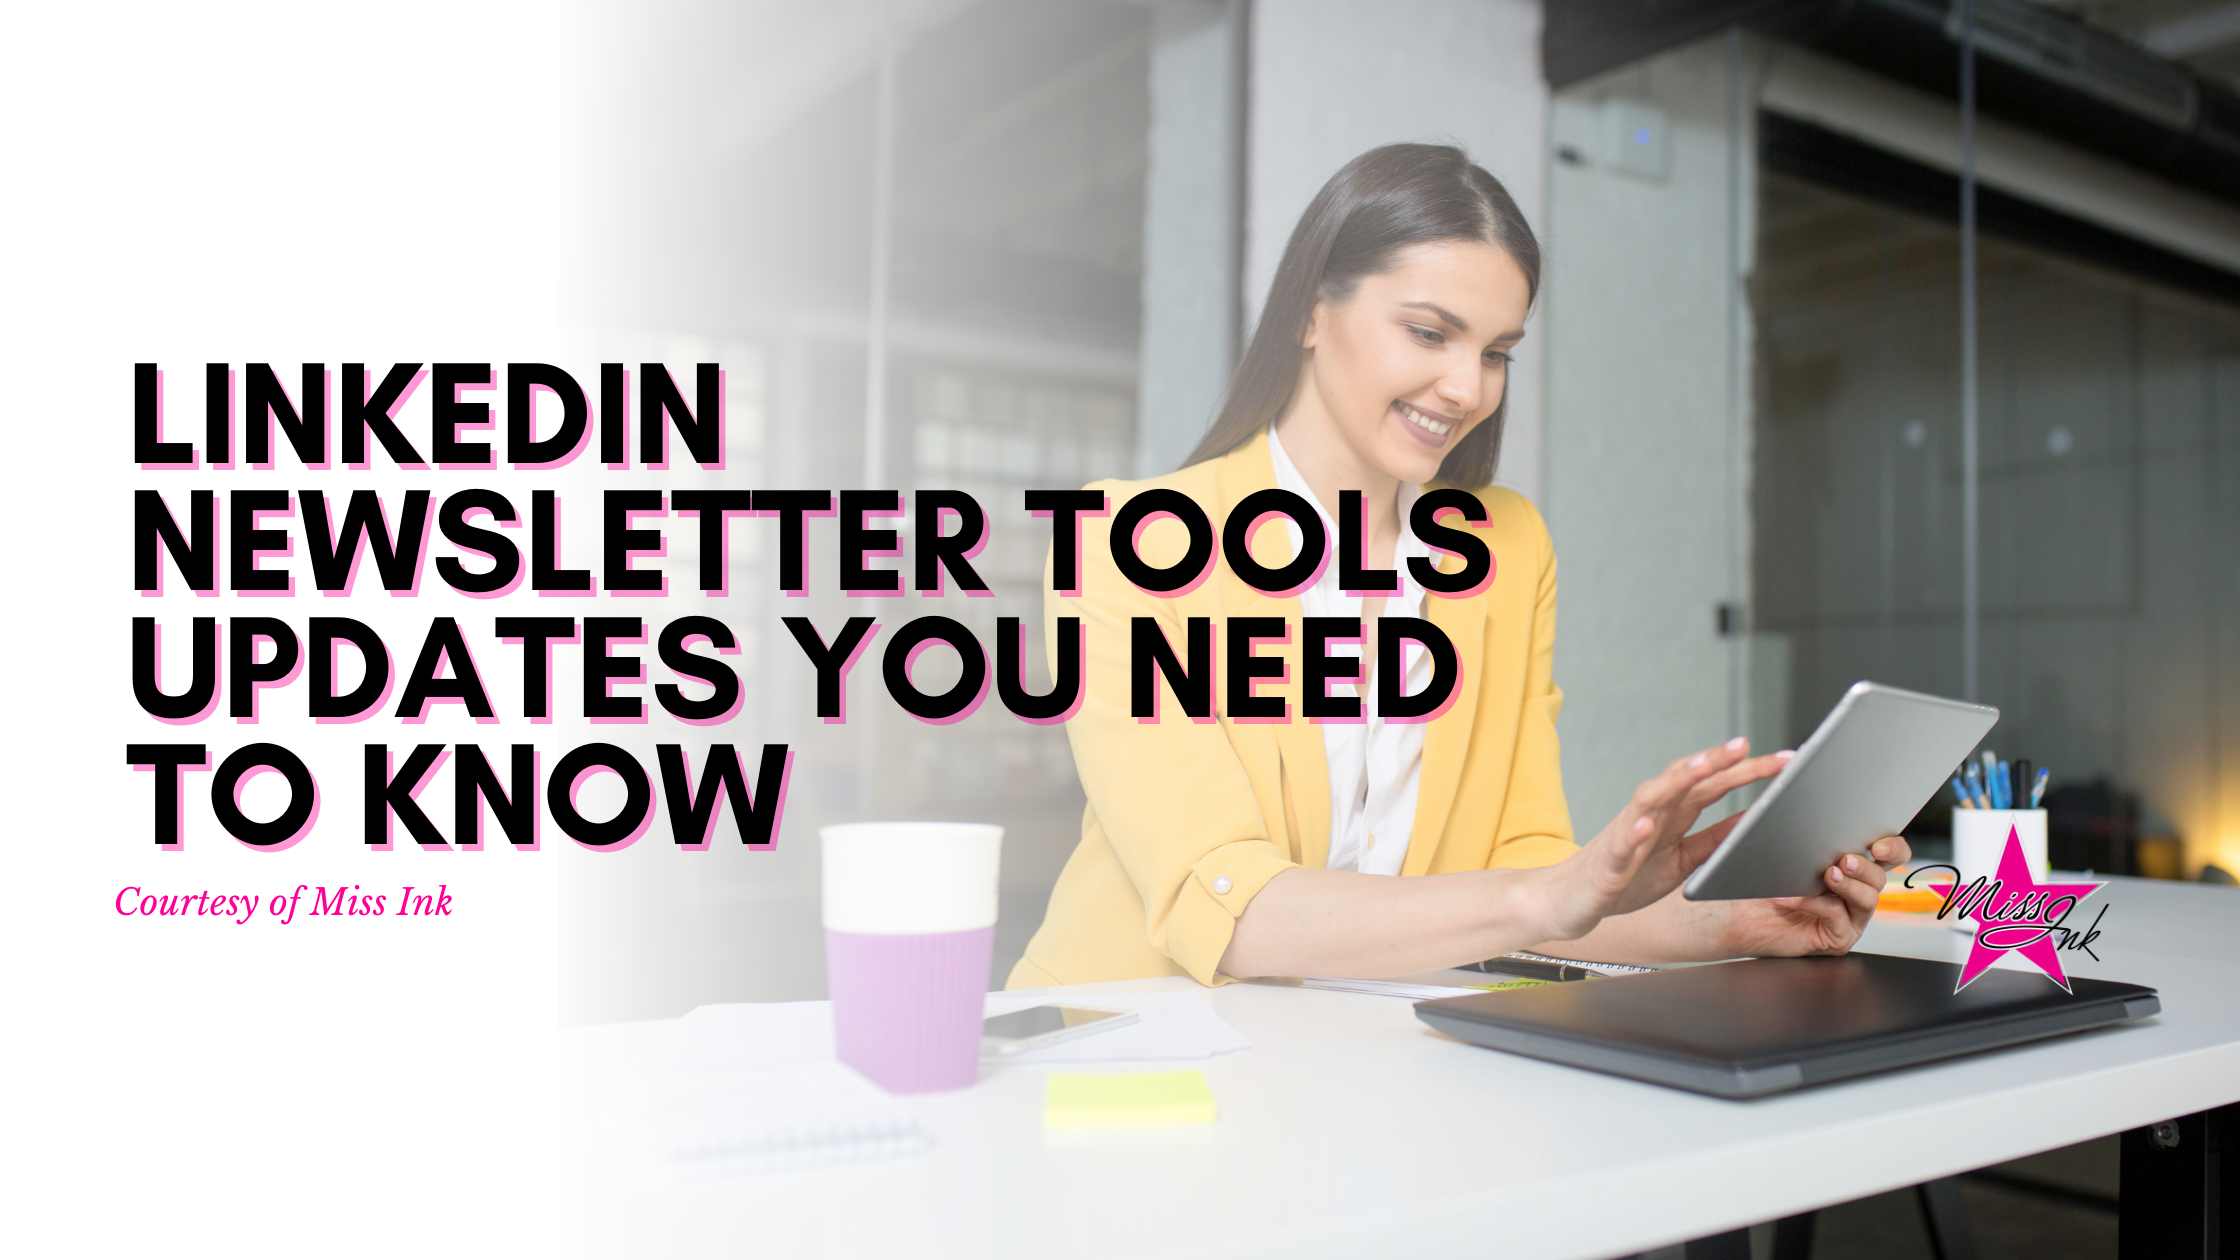 LinkedIn Newsletter Tools Updates You Need To Know